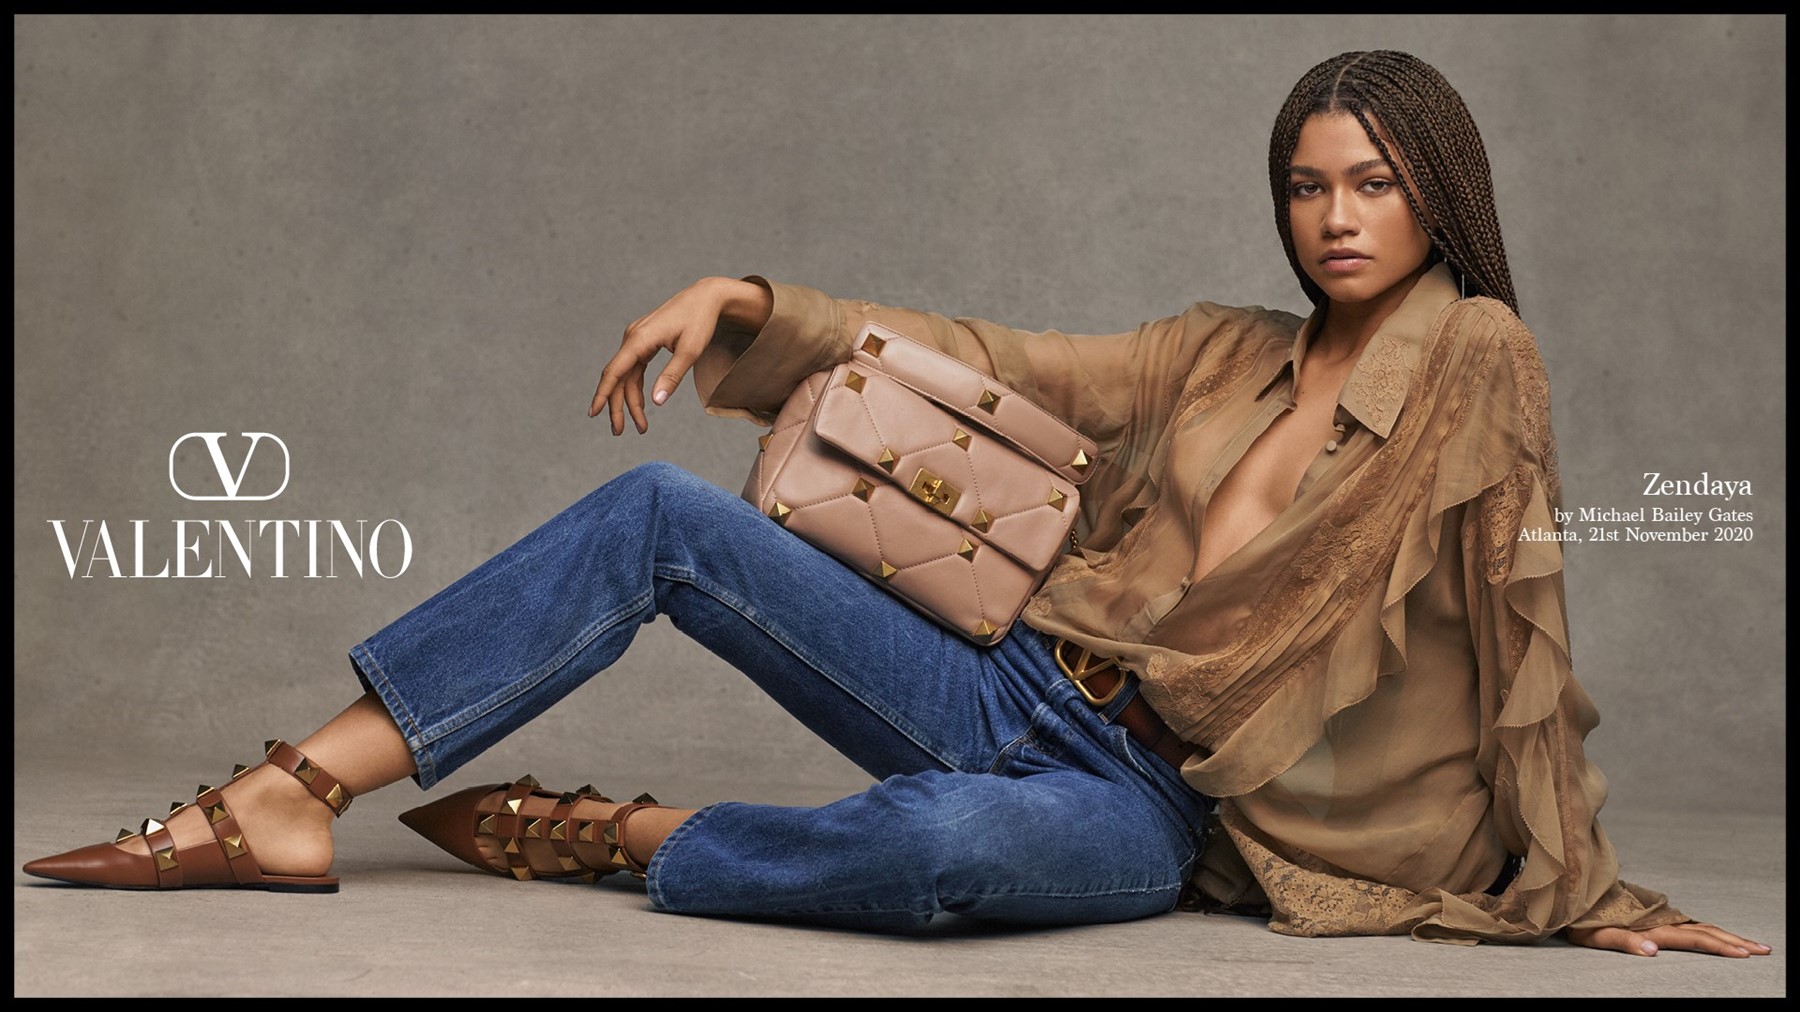 Zendaya Carries Valentino's New It Bag in the Brand's Latest Campaign –  Euphoria Rockstud